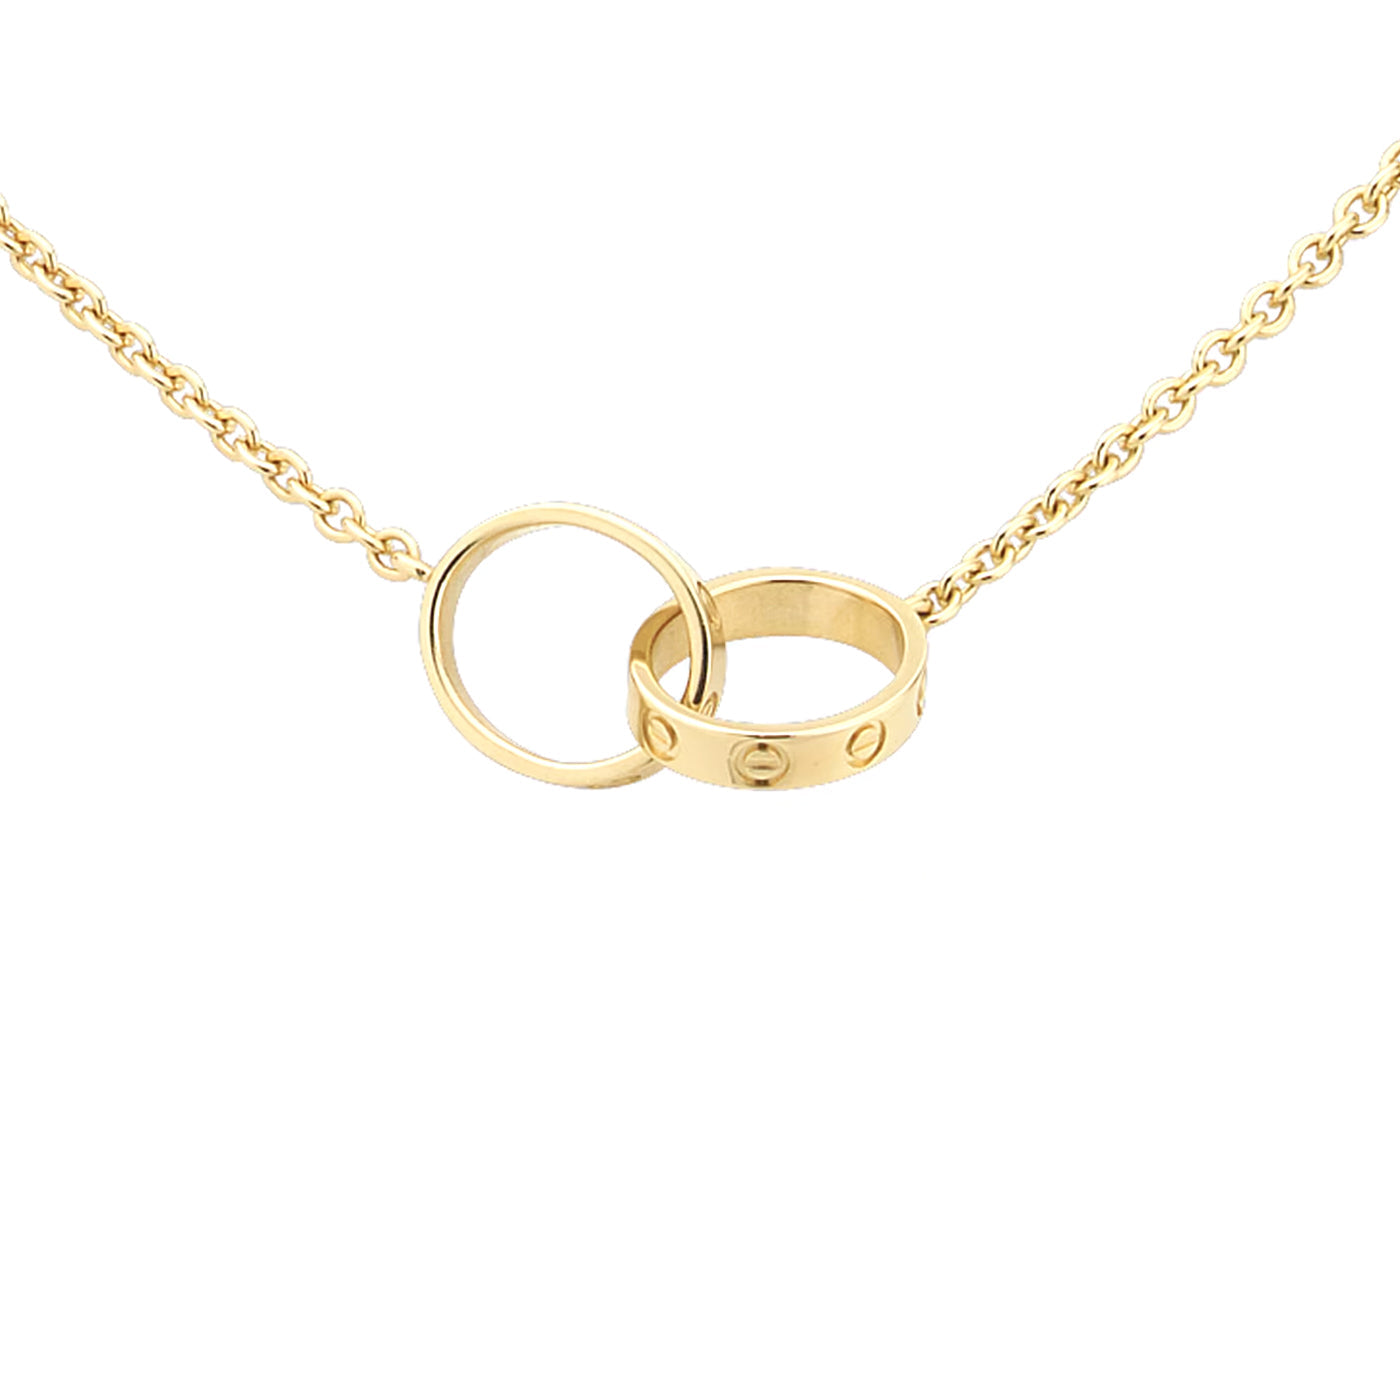 Cartier Love Necklace 18K Yellow Gold